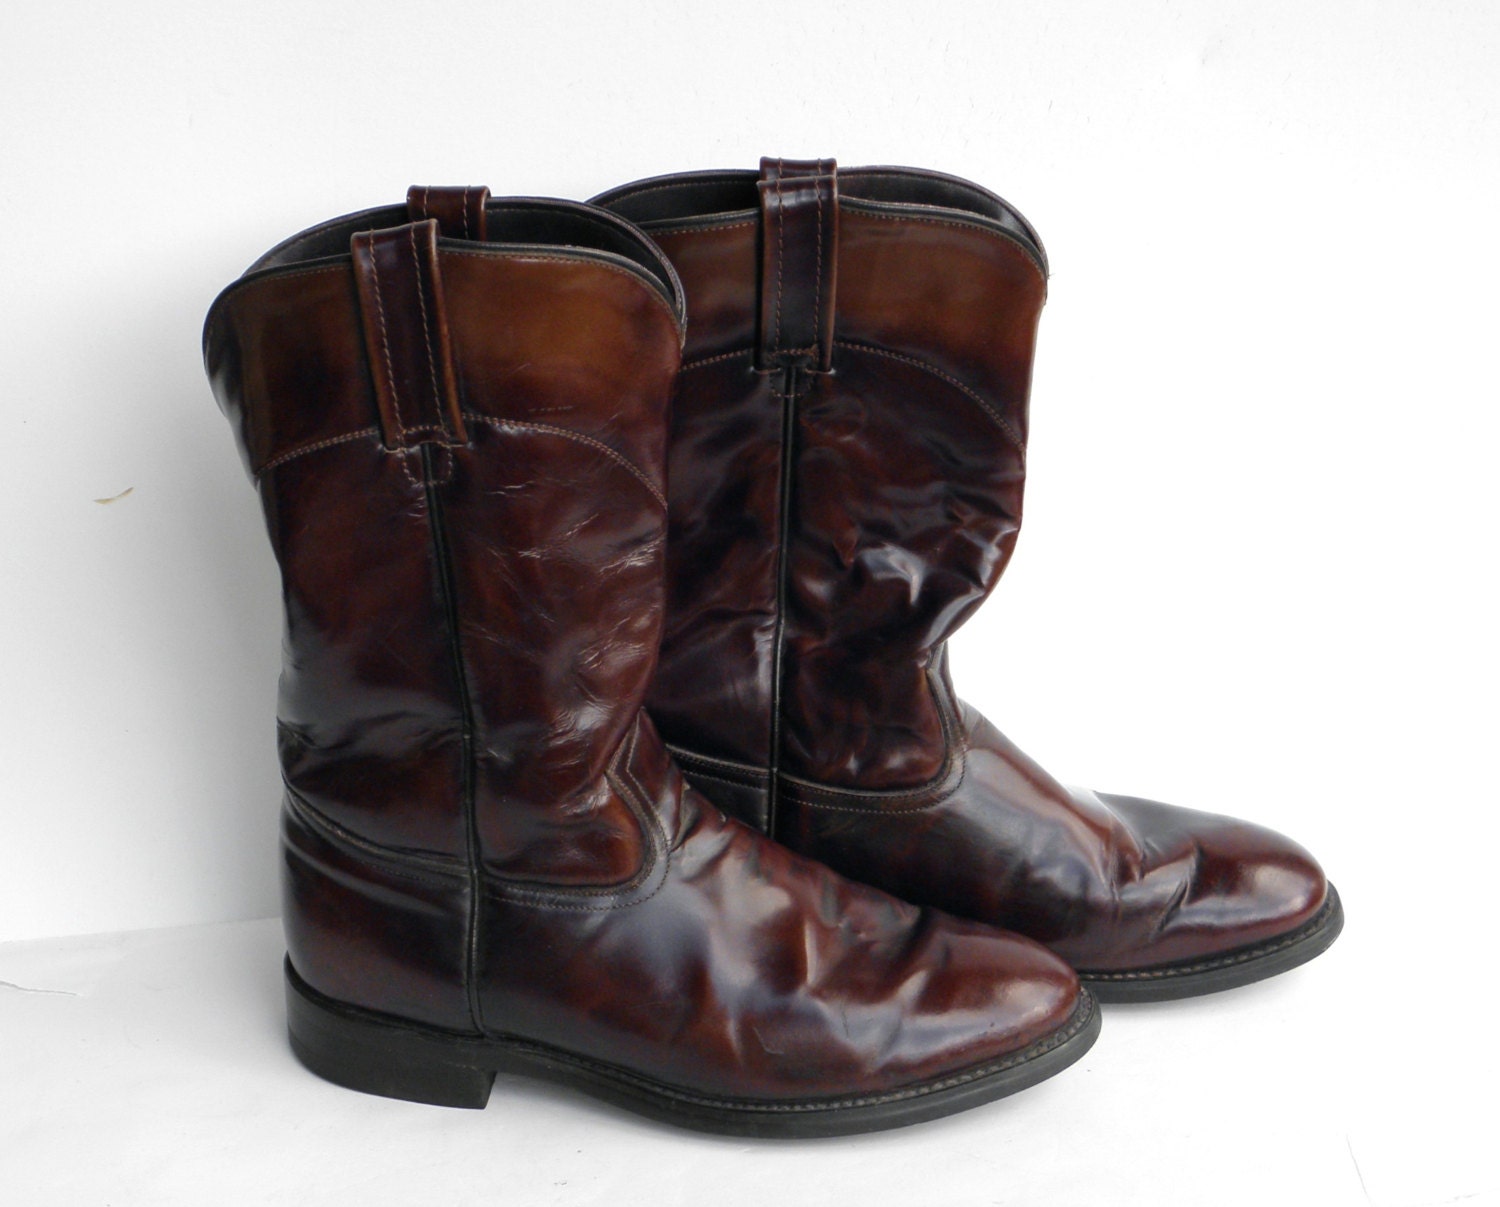 Vintage Leather Boots Acme Boots Mahogany Boots